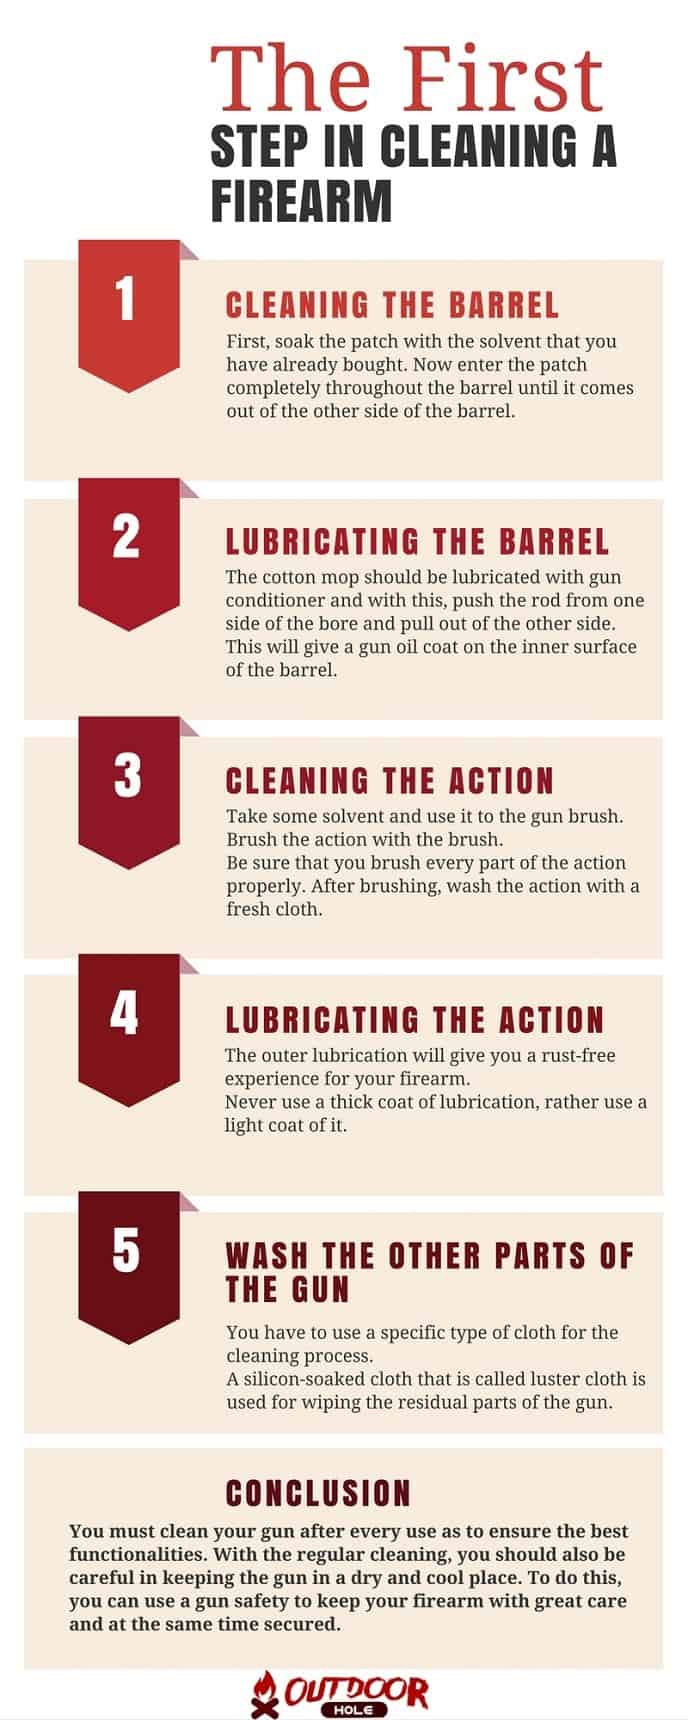 infographic-what-is-the-first-step-in-cleaning-a-firearm-step-by-step